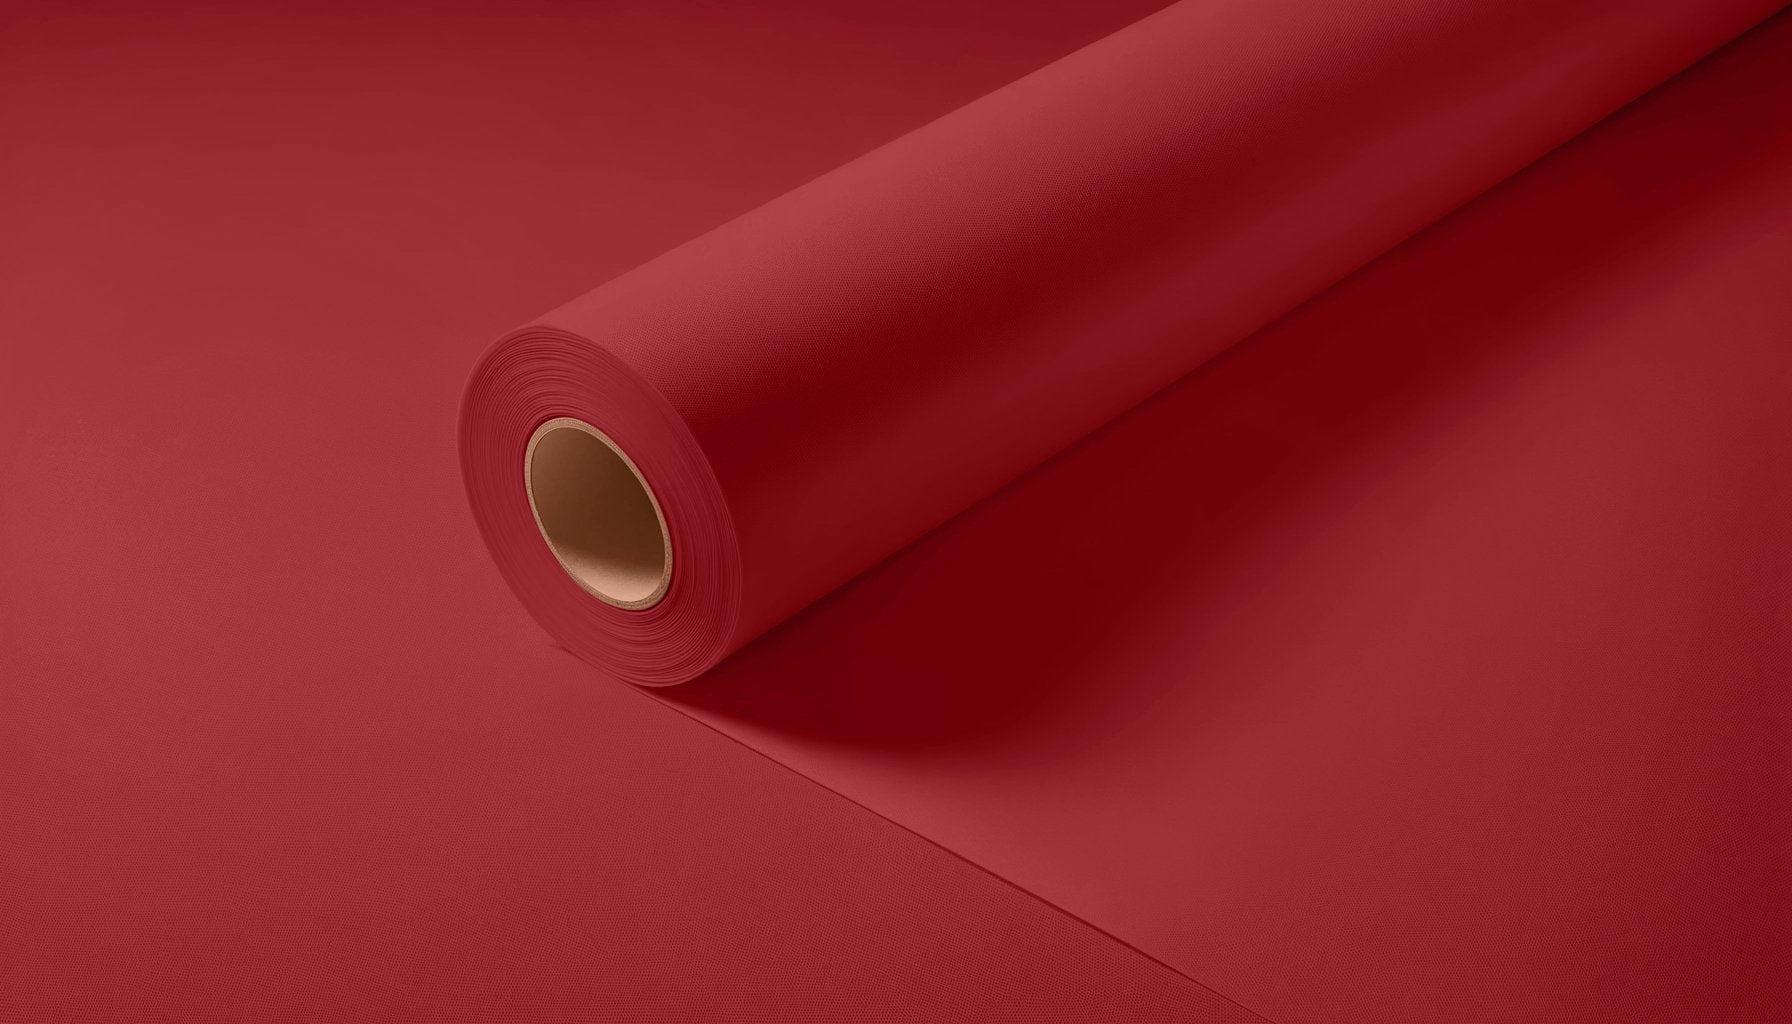 Peel & Stick Removable Re-usable Paint - Color RAL 3003 Ruby Red - offRAL™ - RALRAW LLC, USA